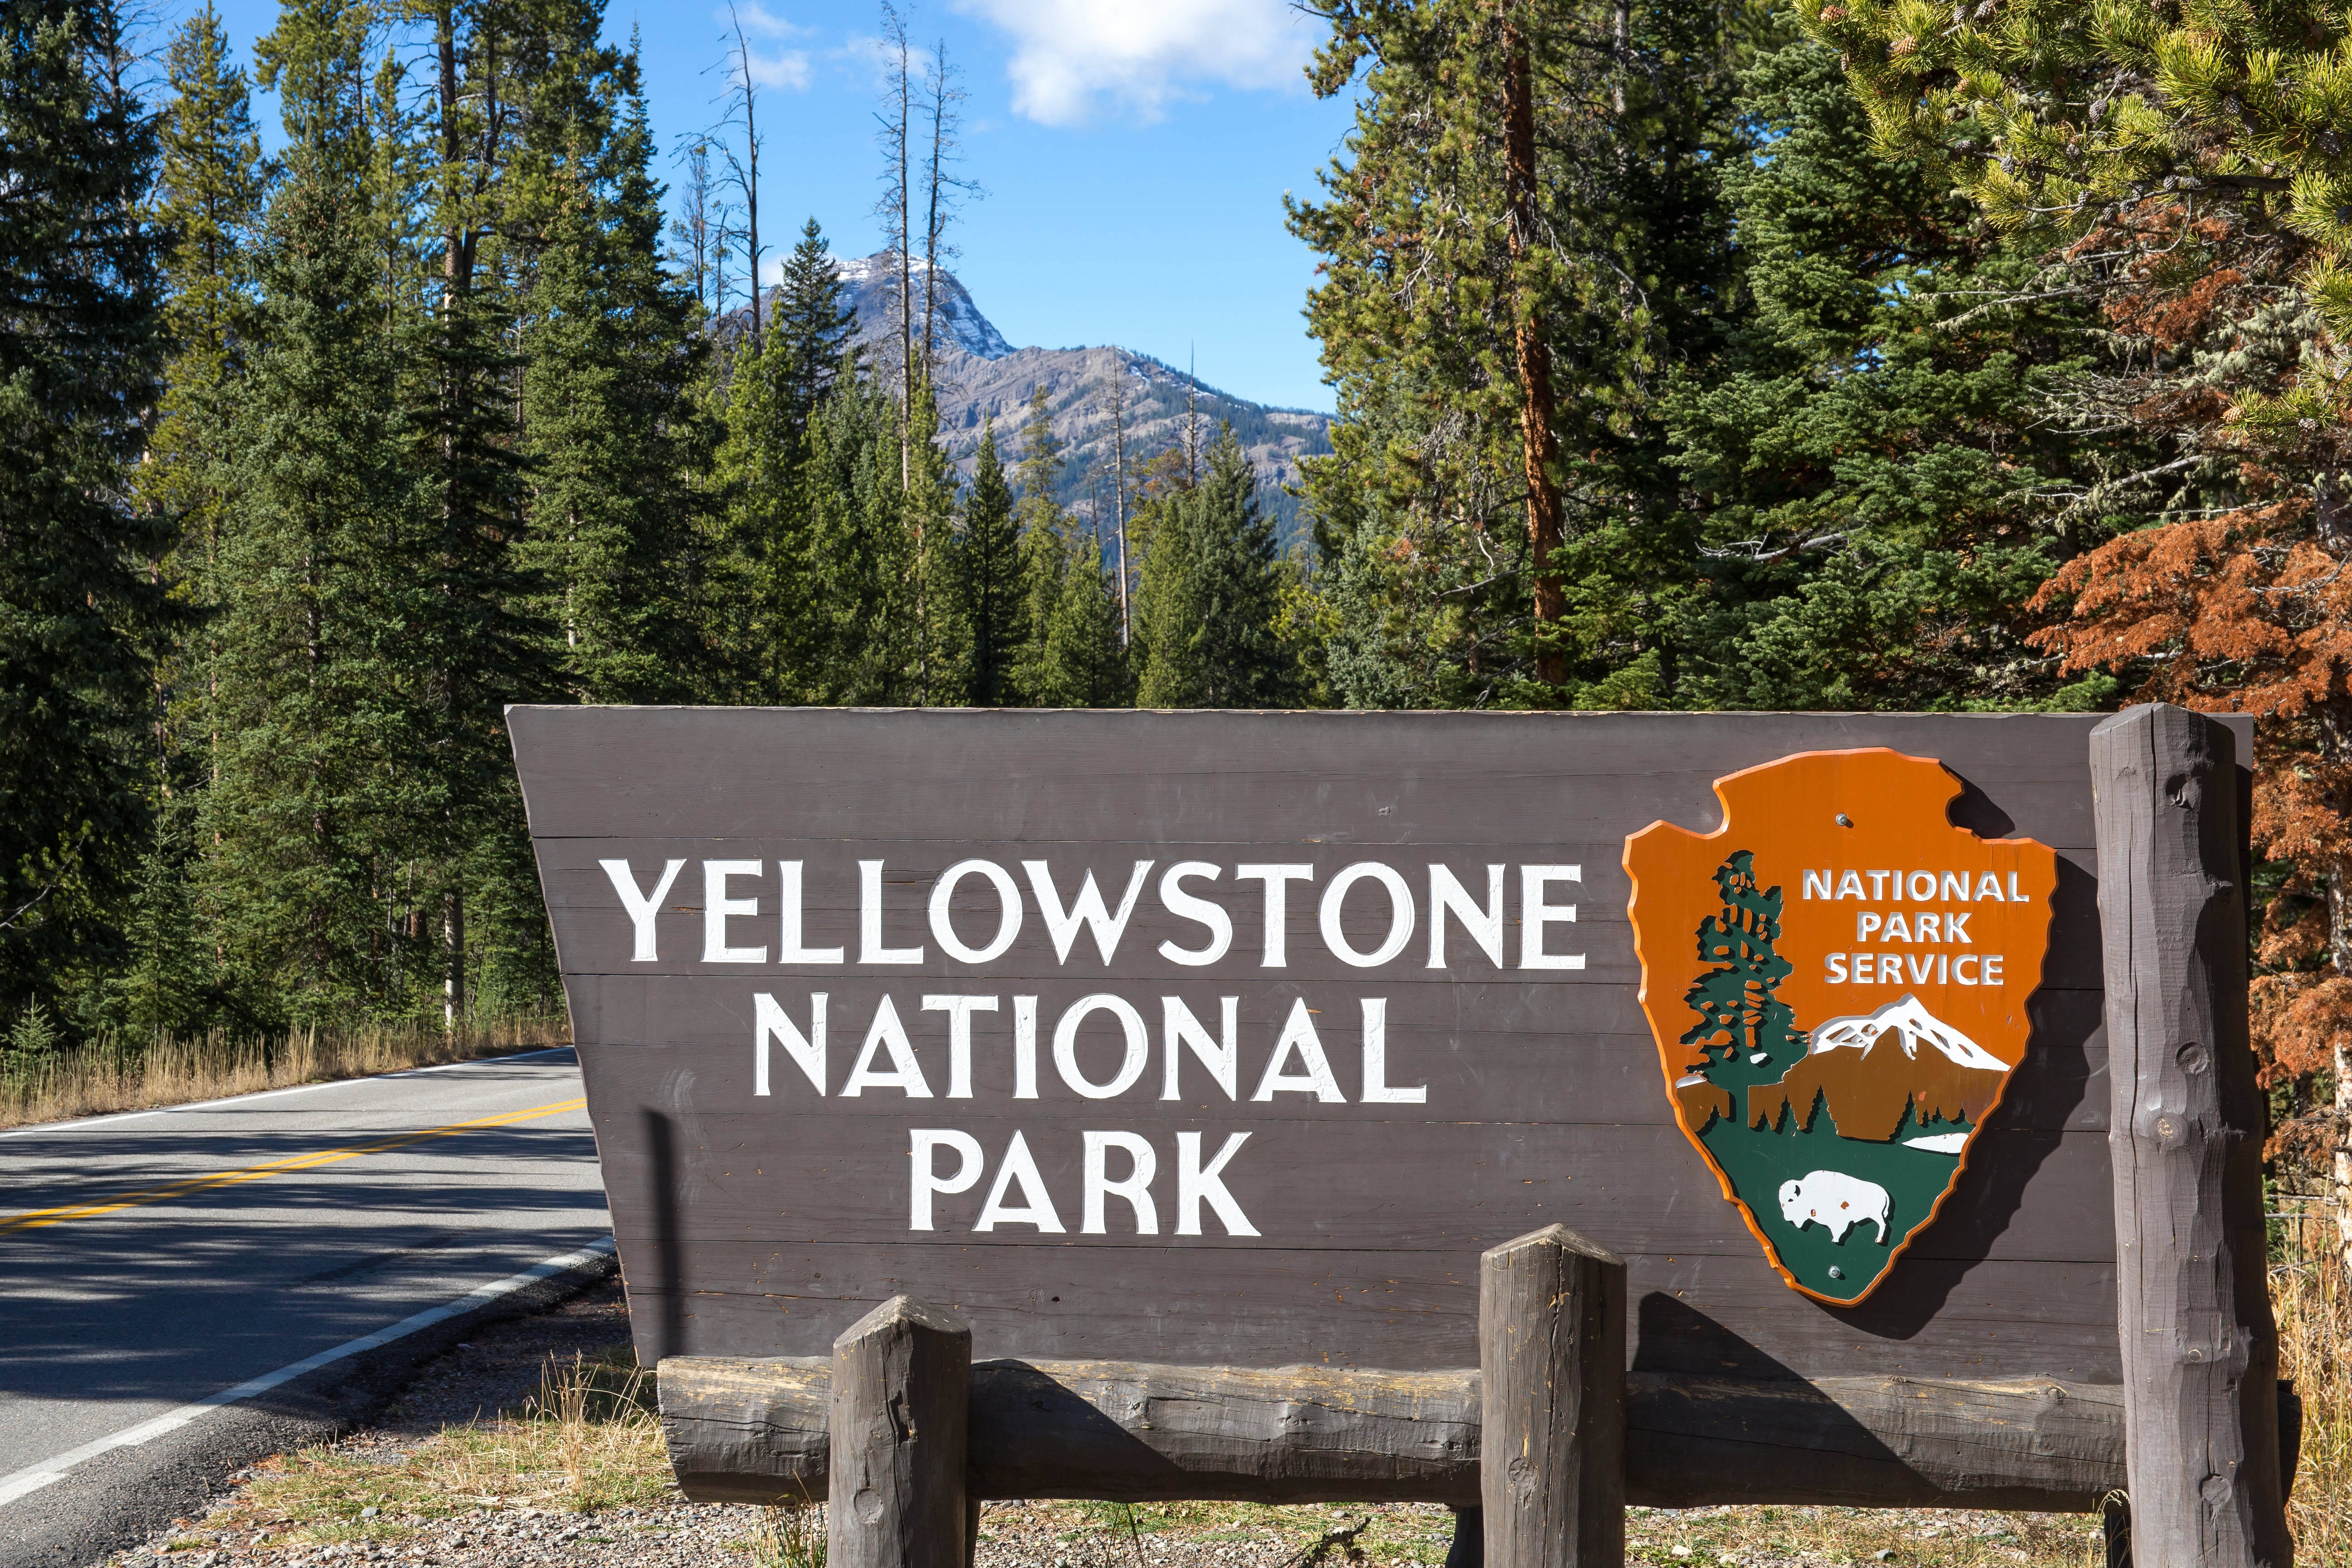 5 Fascinating Facts About Yellowstone National Park That Will Make You Want to Visit